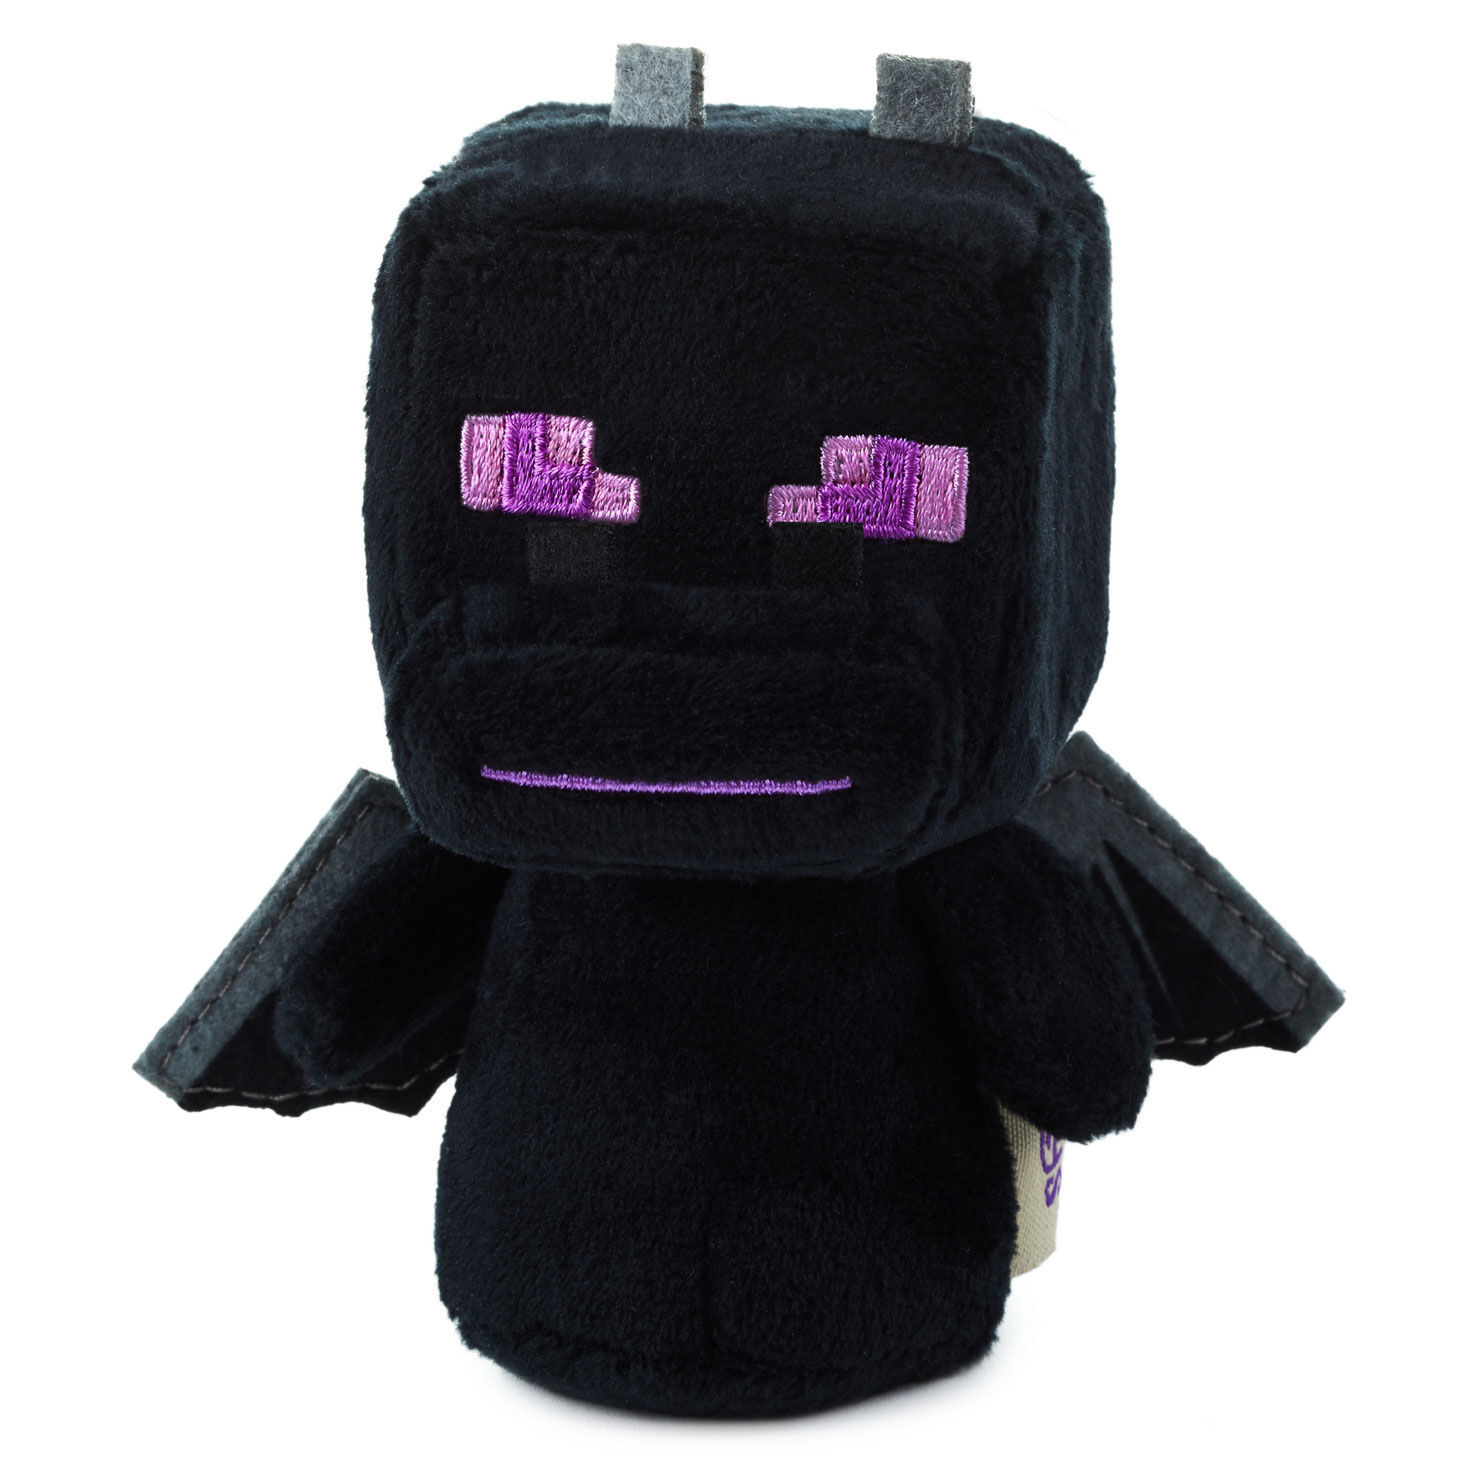 Minecraft]Endermite - How to make a plush toy - DIY 